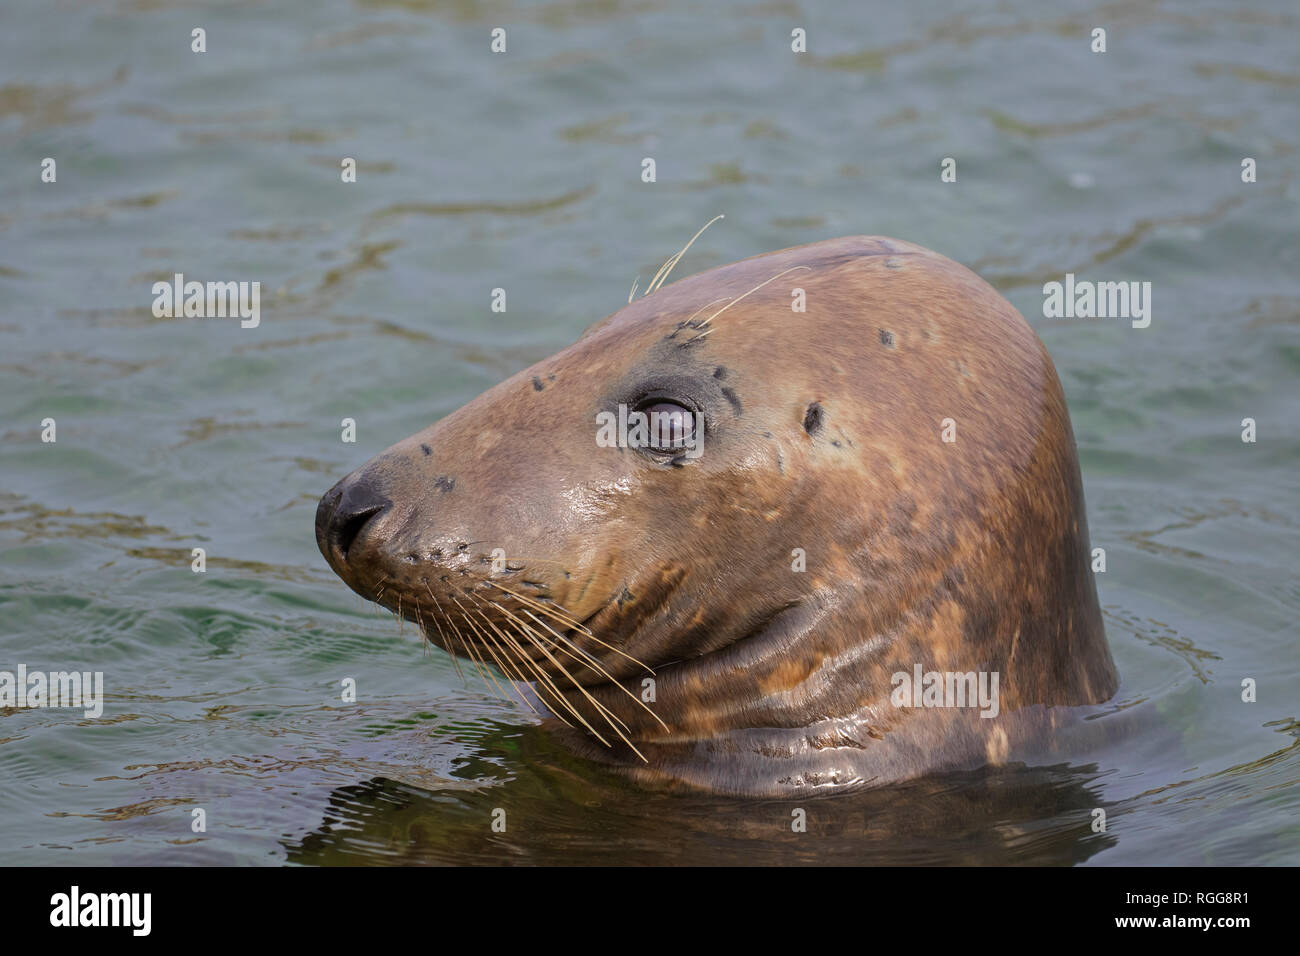 Grey seal / gray seal (Halichoerus grypus) swimming in sea. Close-up of head showing large whiskers Stock Photo